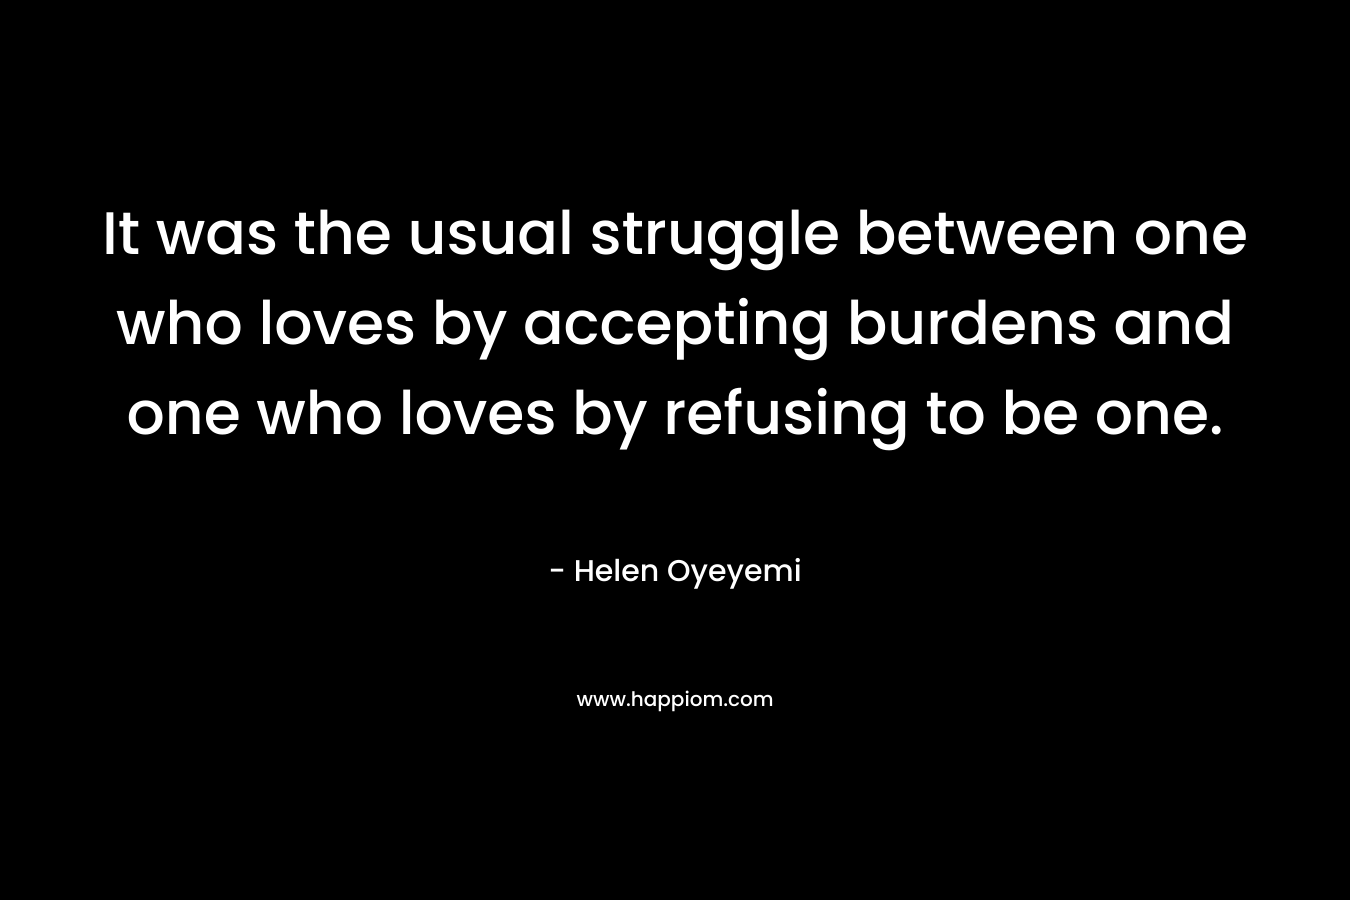 It was the usual struggle between one who loves by accepting burdens and one who loves by refusing to be one.